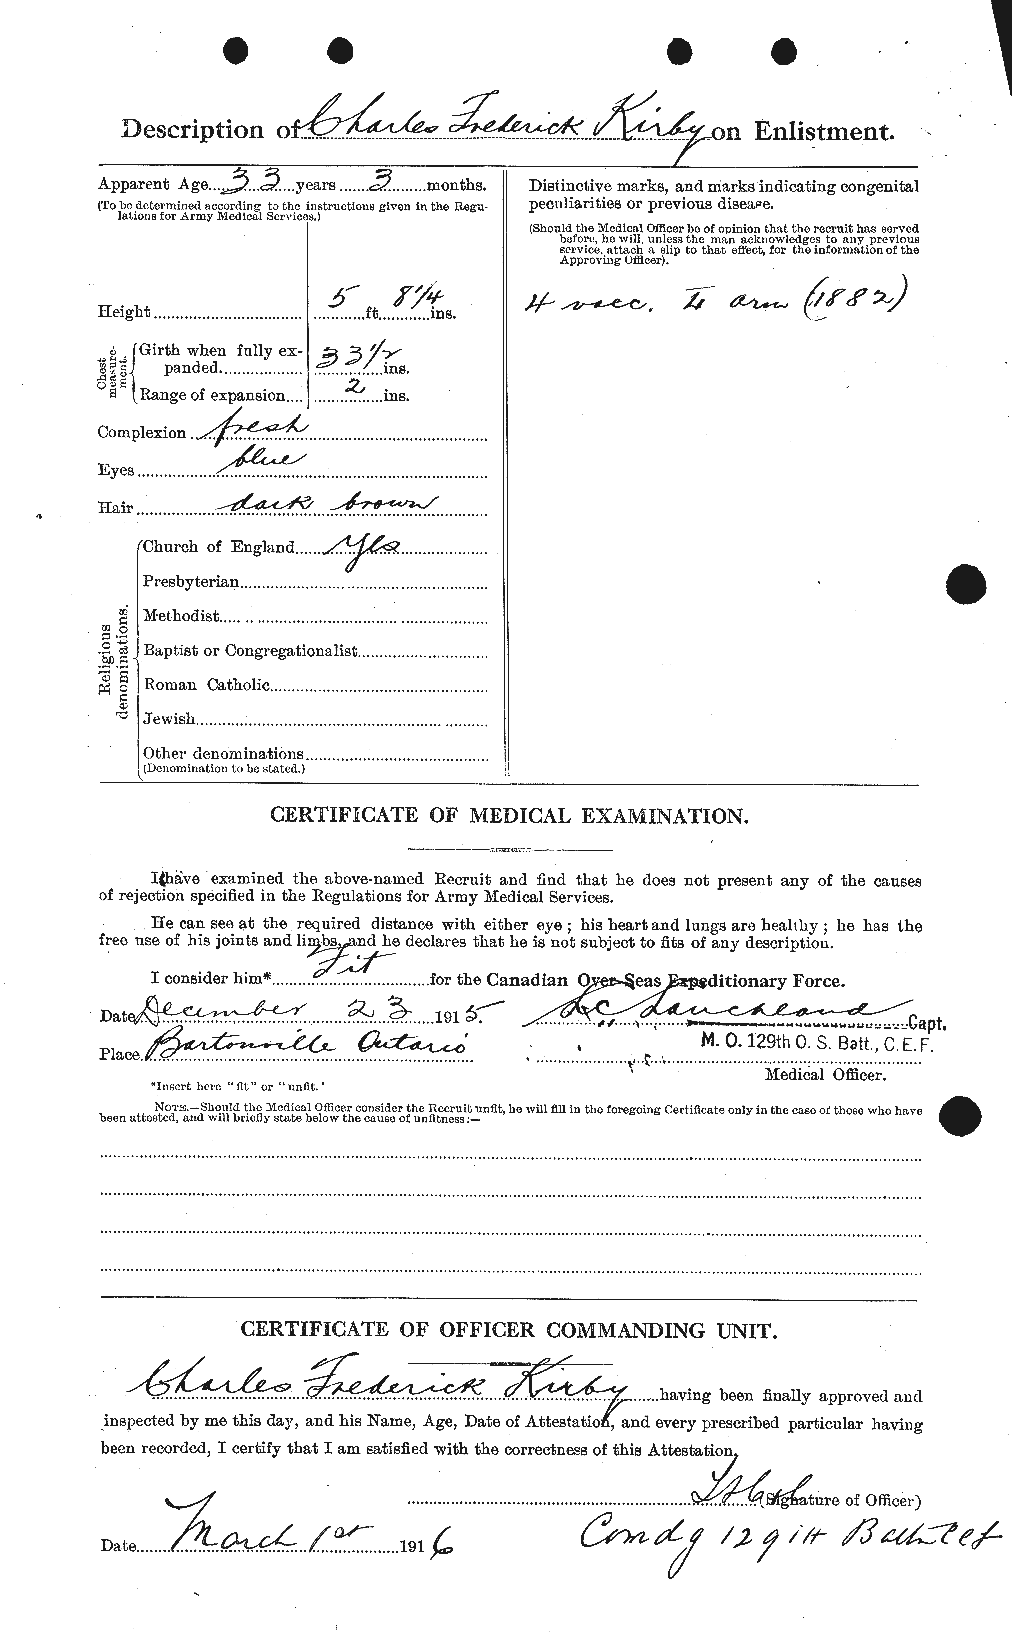 Personnel Records of the First World War - CEF 437166b